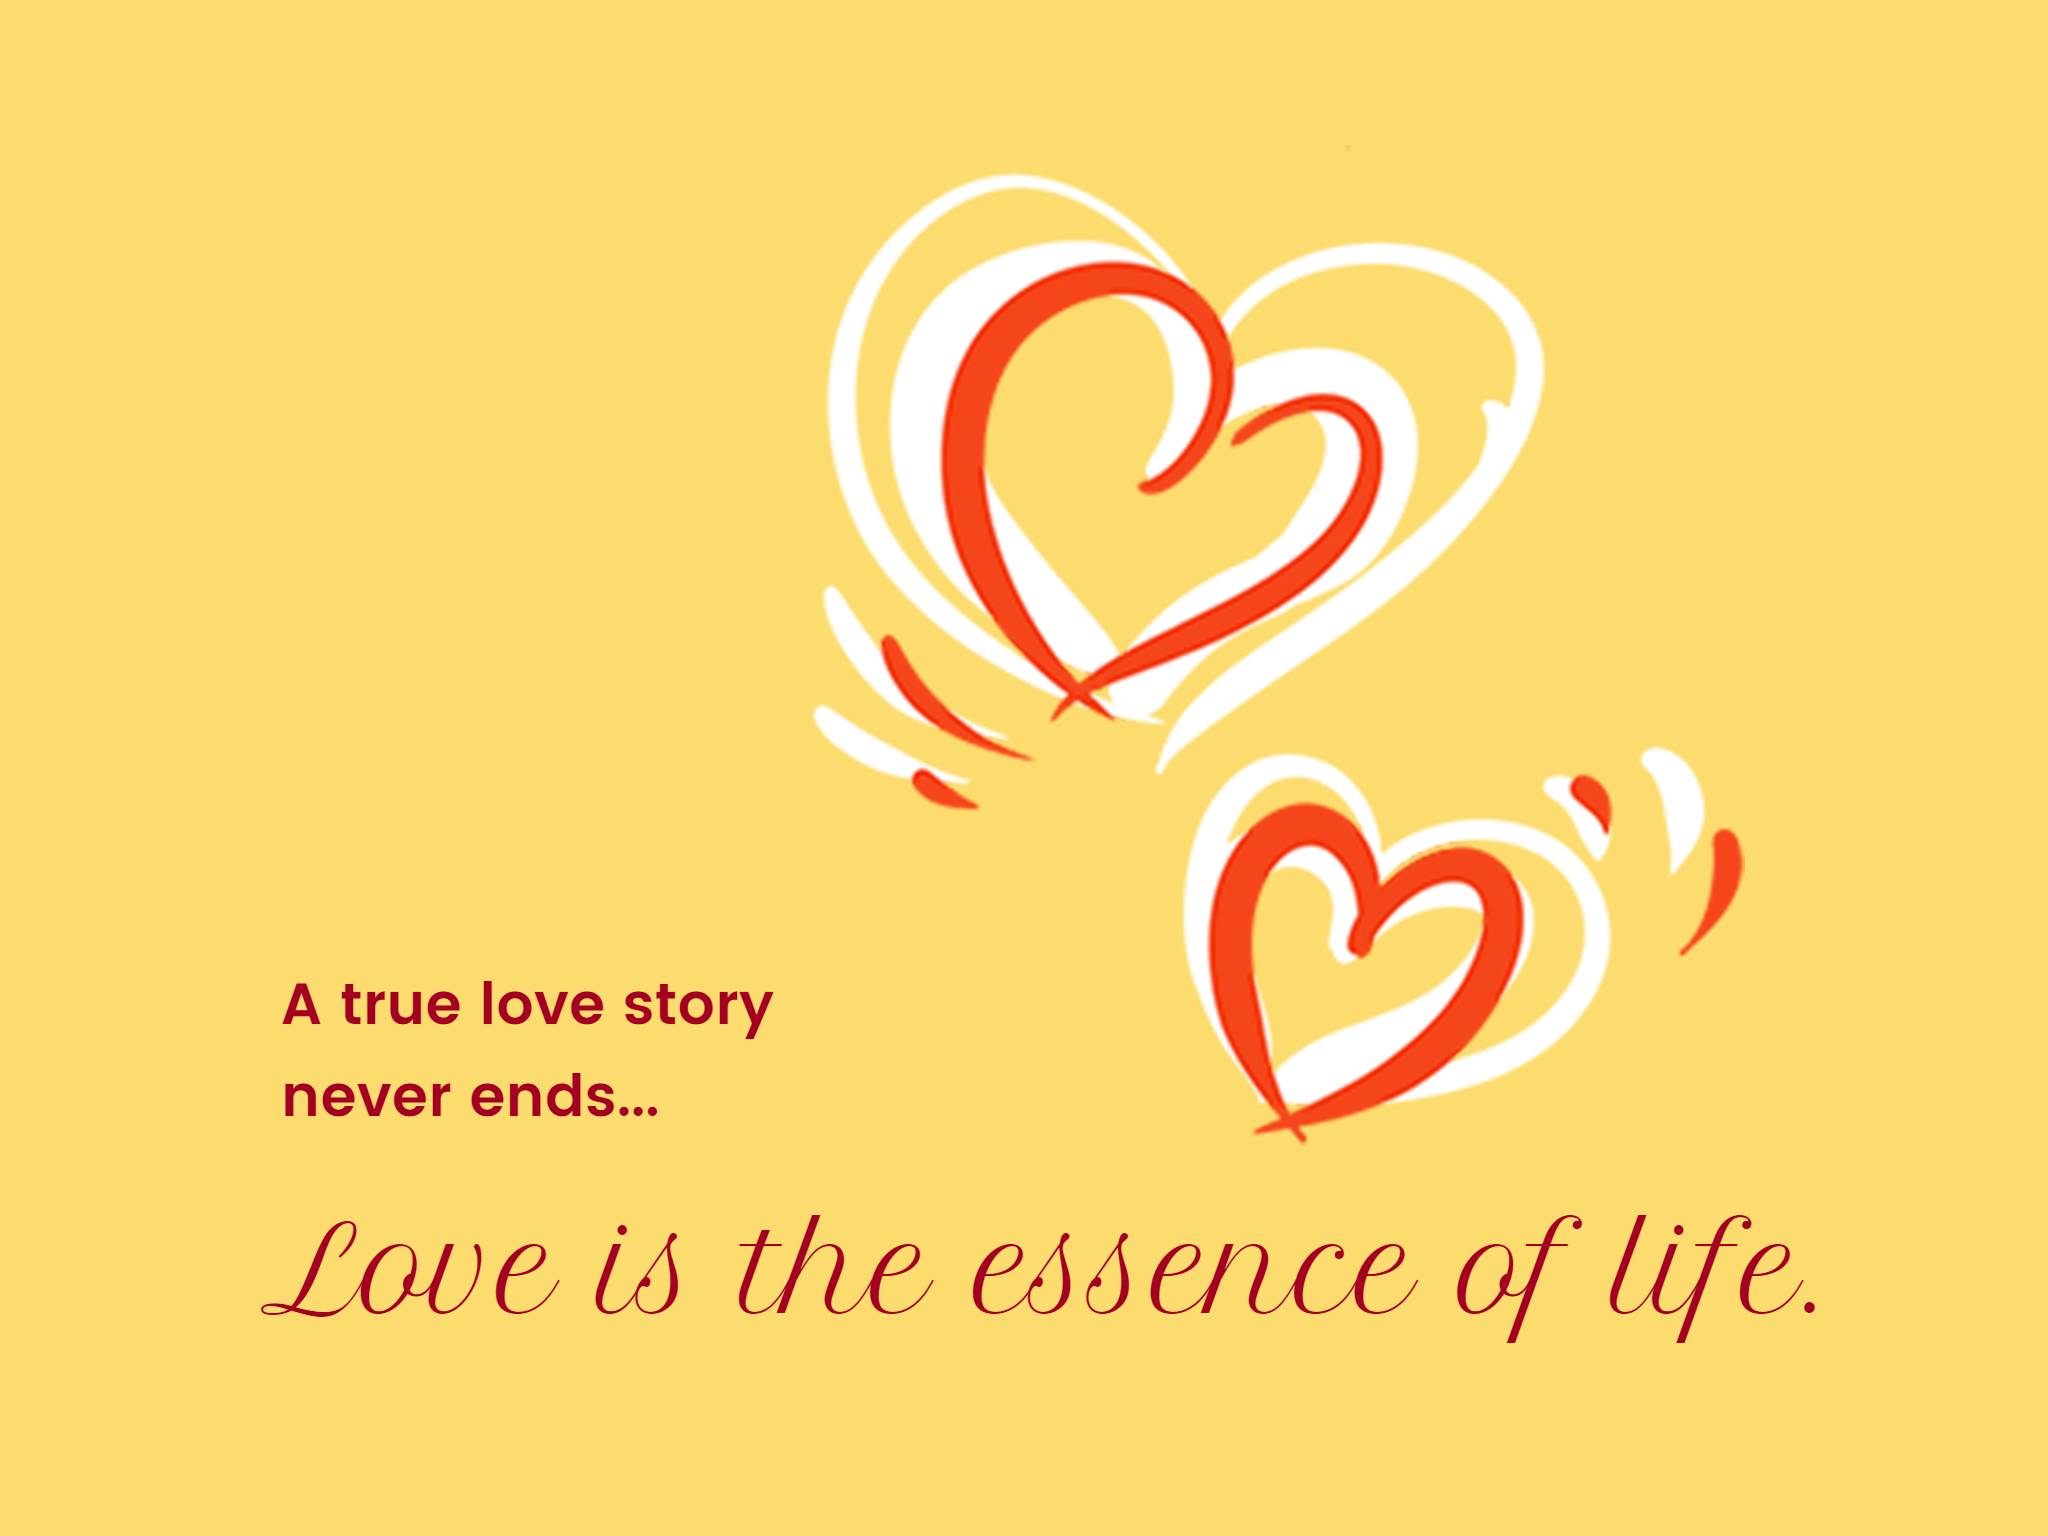 meaningful short quotes about life and love with yellow backdrop and heart